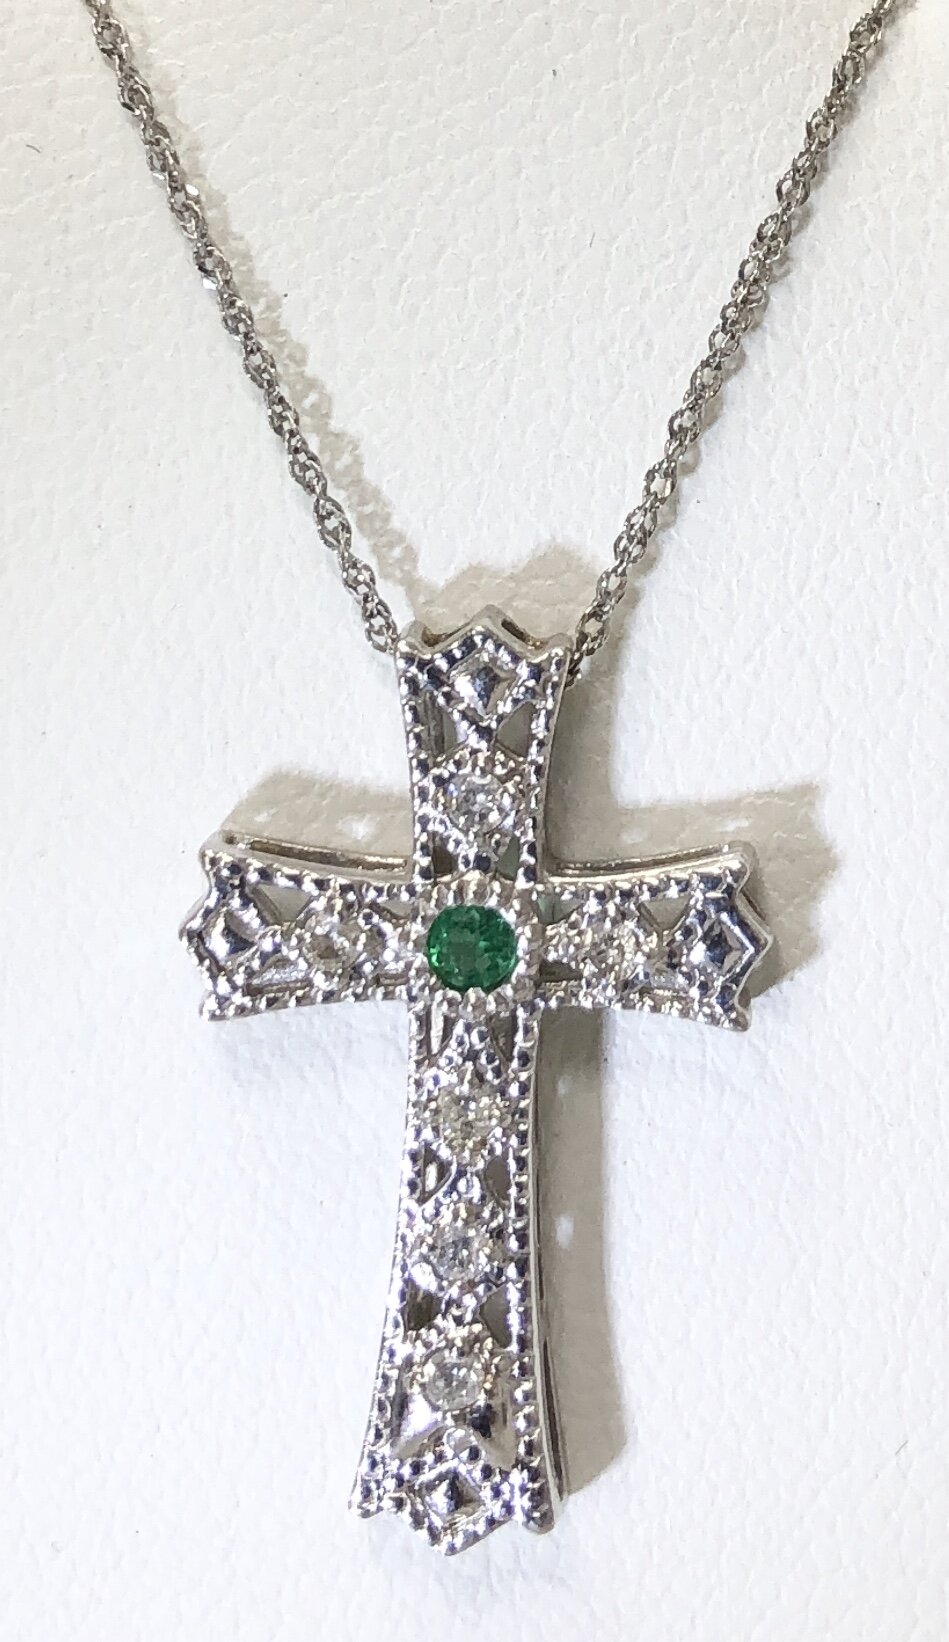 Details about   Diamond & Smoky Quartz Cross Pendant Necklace Set In Set in Sterling Silver Wit